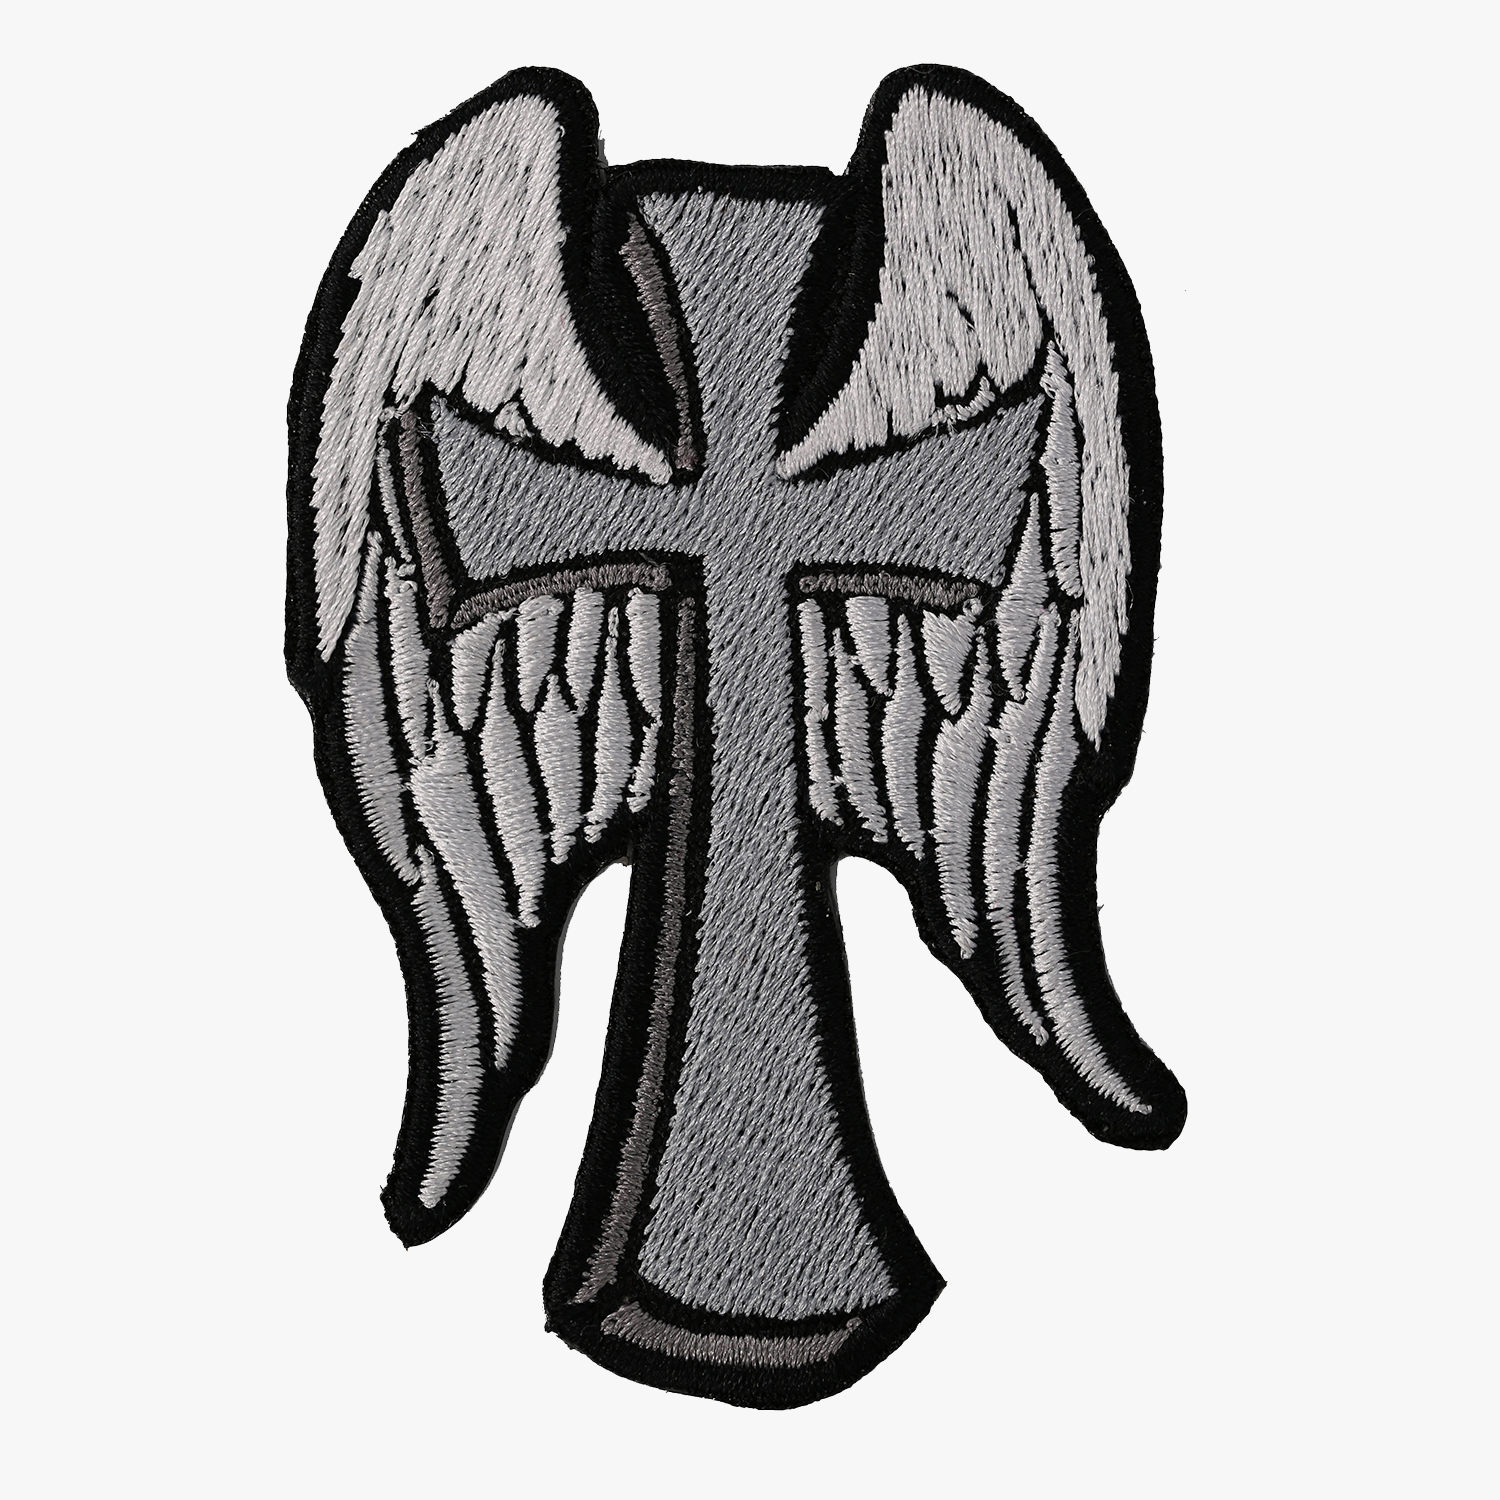 CROSS & WINGS Biker Vest Embroidered Patch